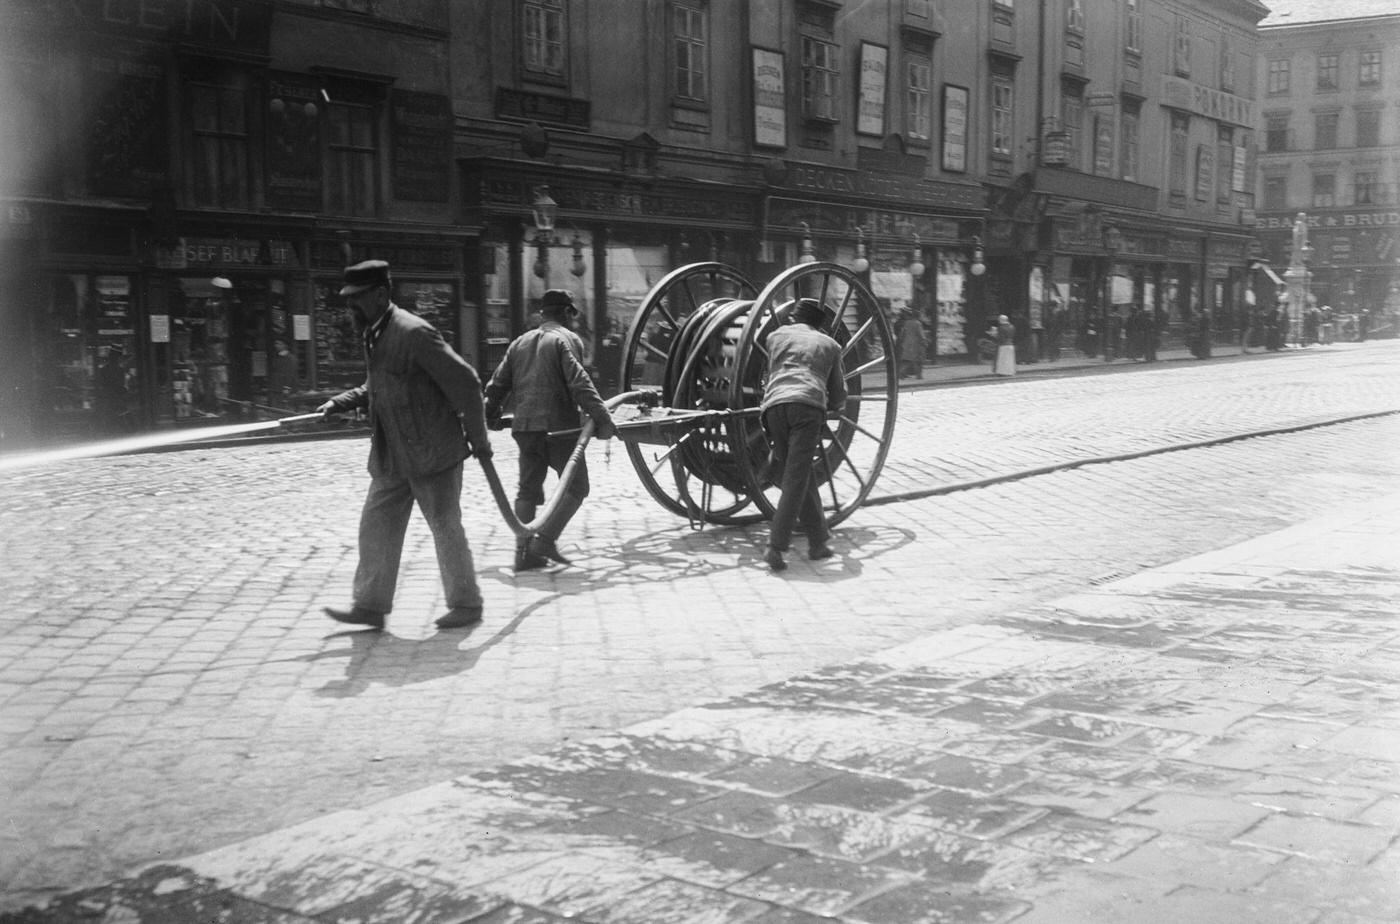 Men are cleaning the Mariahilfer Strasse, Vienna, 1900s